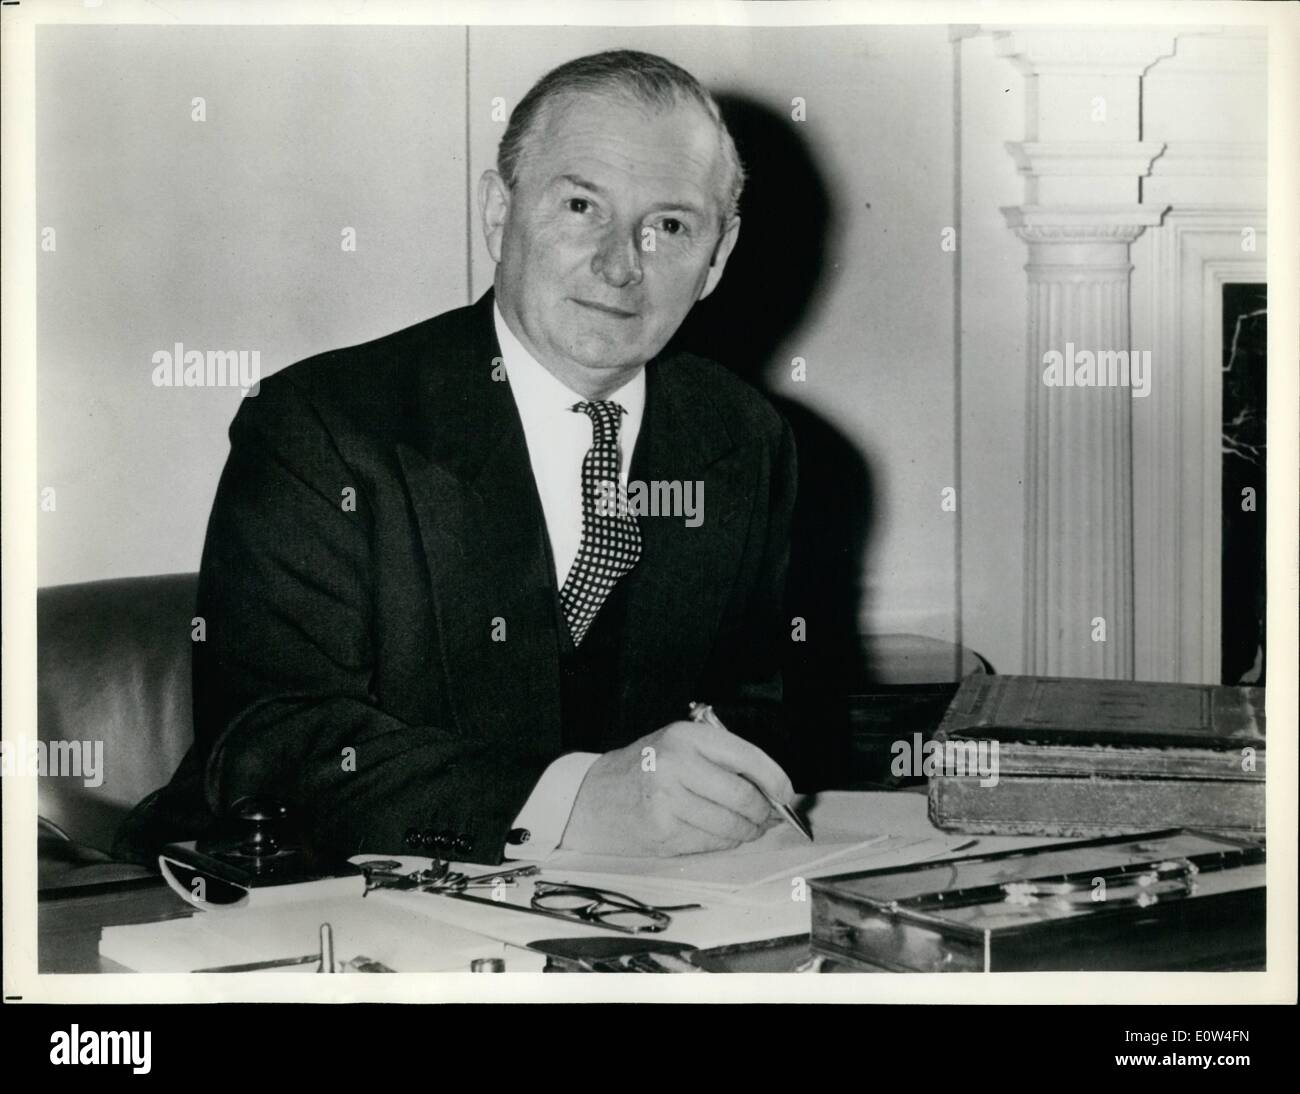 Apr. 04, 1961 - Monday's man in Britain: Mr. Selwyn Lloyd, Britain's Chancellor of the Exchequer, works in his office in the Treasury, London, on the Budget which he will present to the House of Commons and the British people next Monday, April 17. On his desk beside him (right) is the battered red despatch box in which since the 1850's British Chancellors have carried their accounting of the previous year's finances (ending on March 31) and their proposals for the coming year's taxation Stock Photo